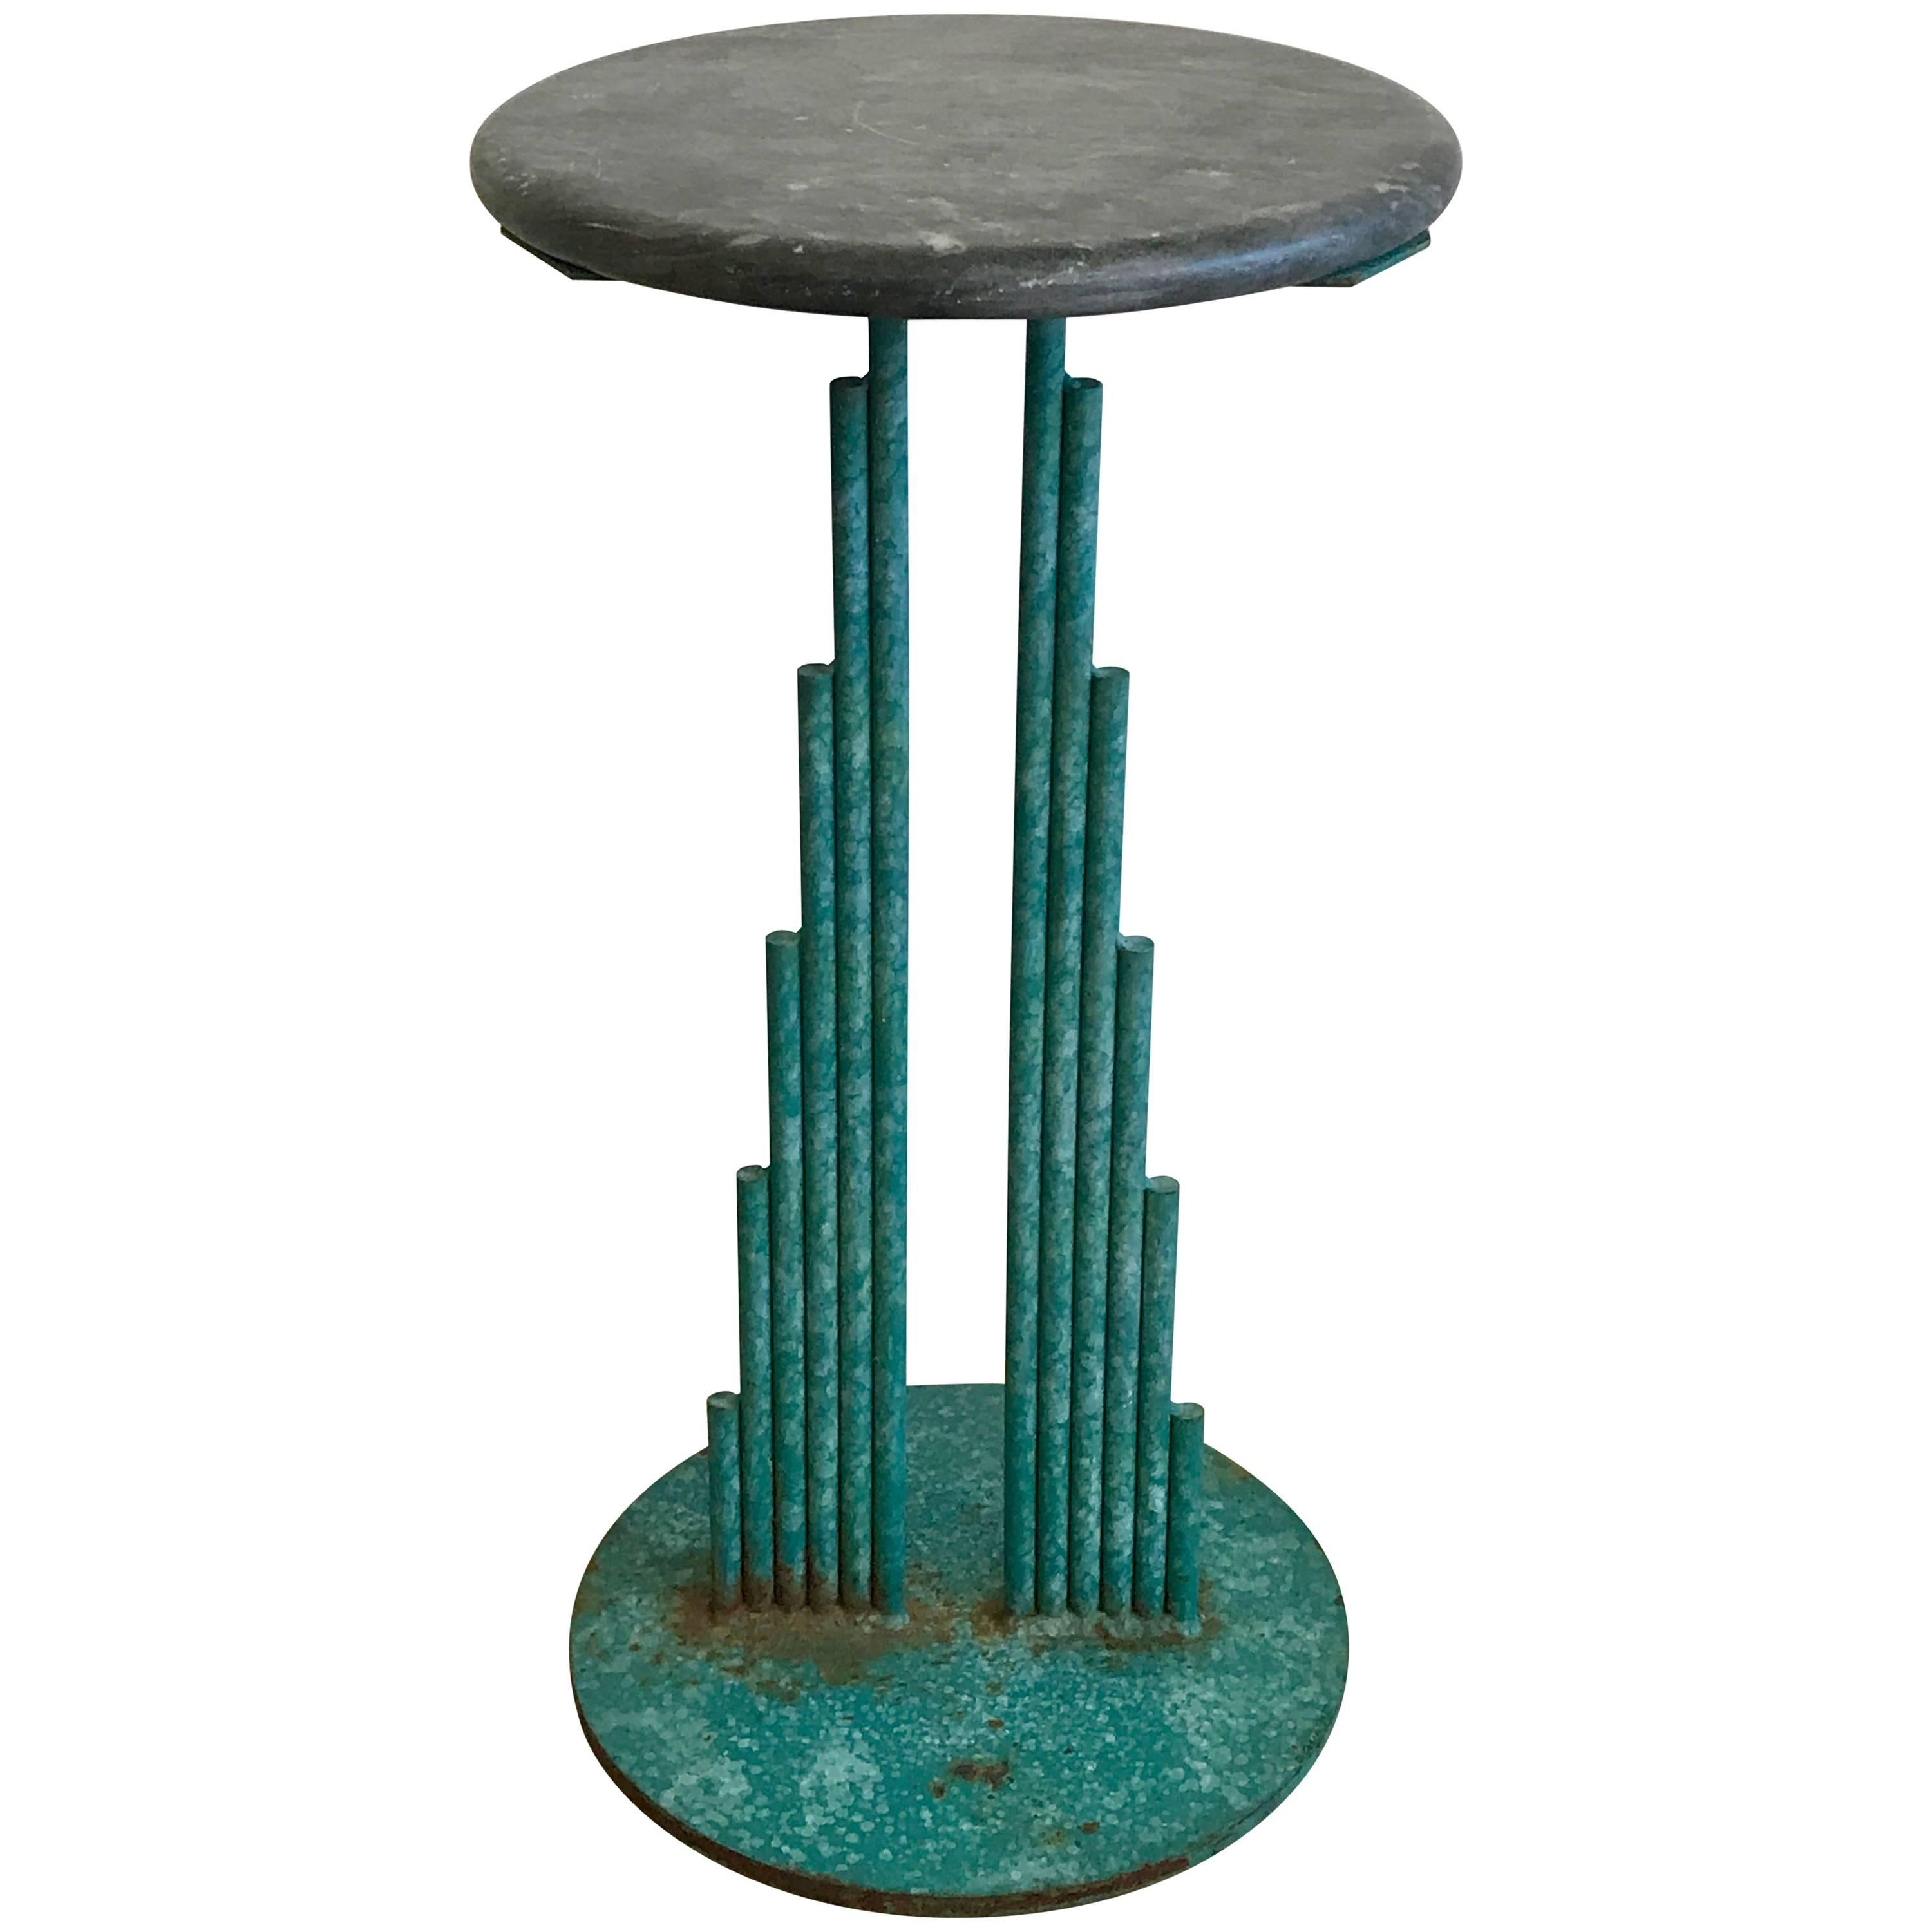  Curtis Jere Memphis Era Metal Side Table with Round Marble Top, 1987